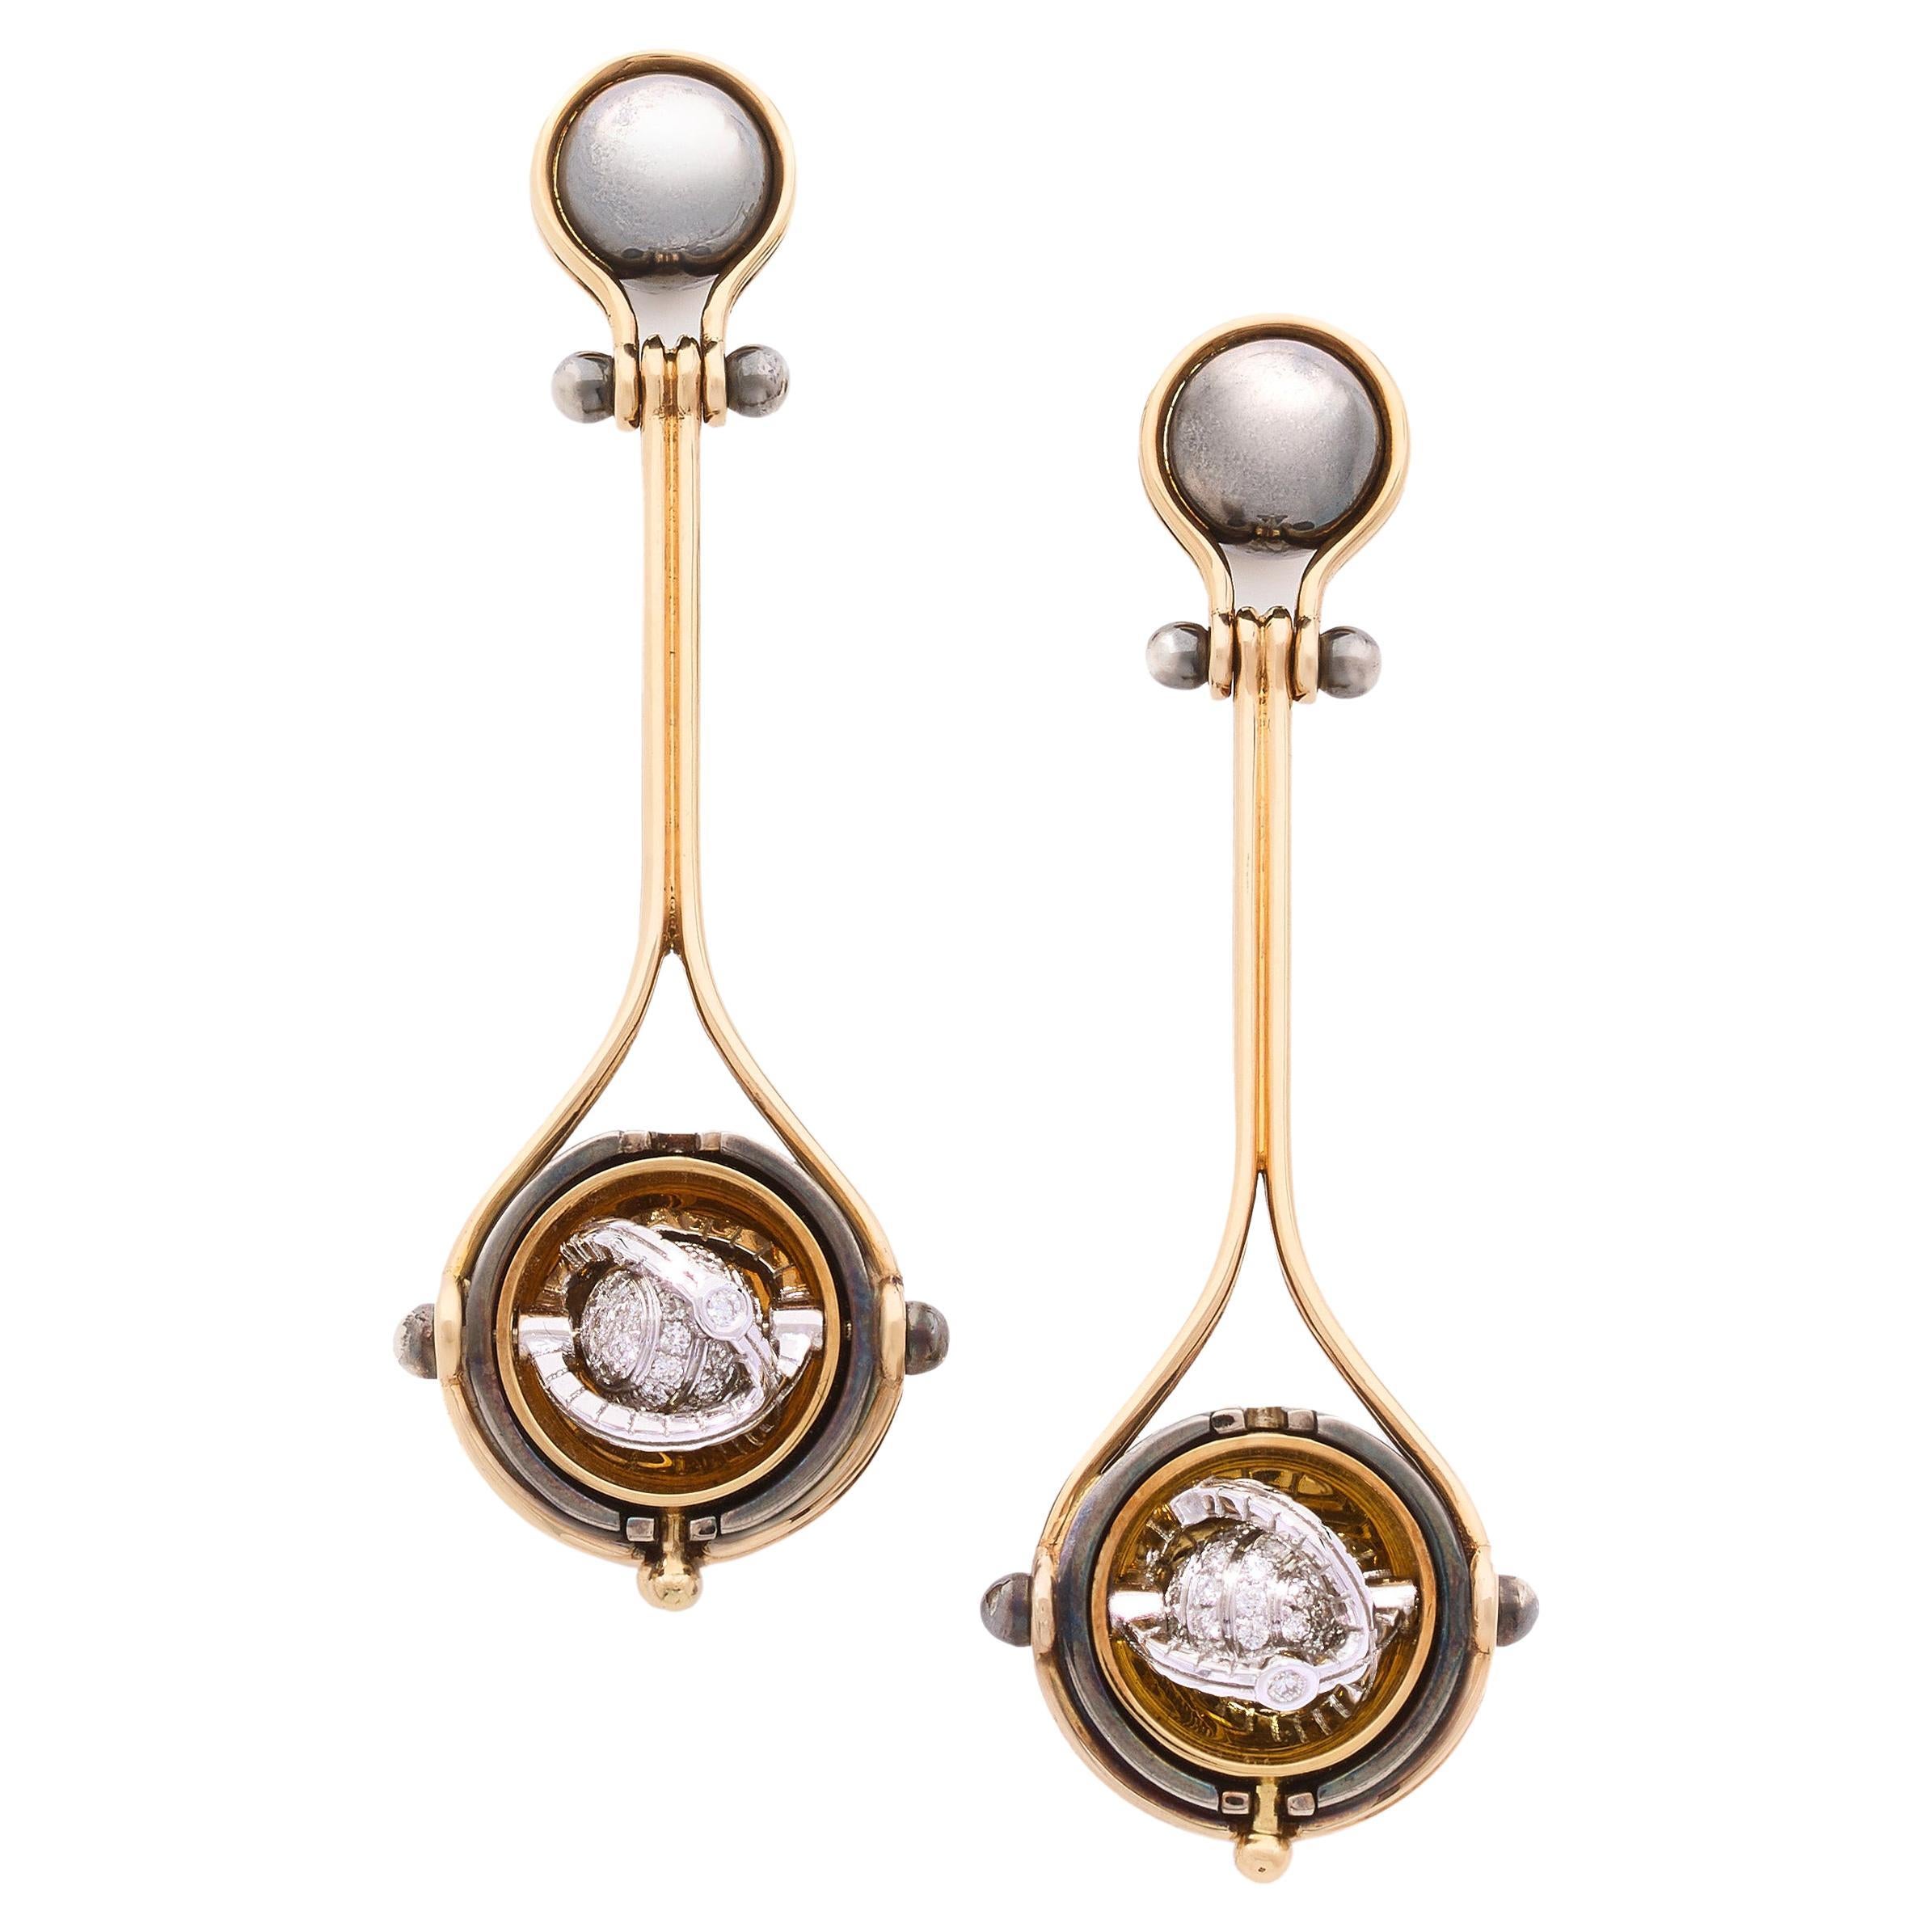 Diamond Pluton Earrings in 18k Yellow Gold & Distressed Silver by Elie Top